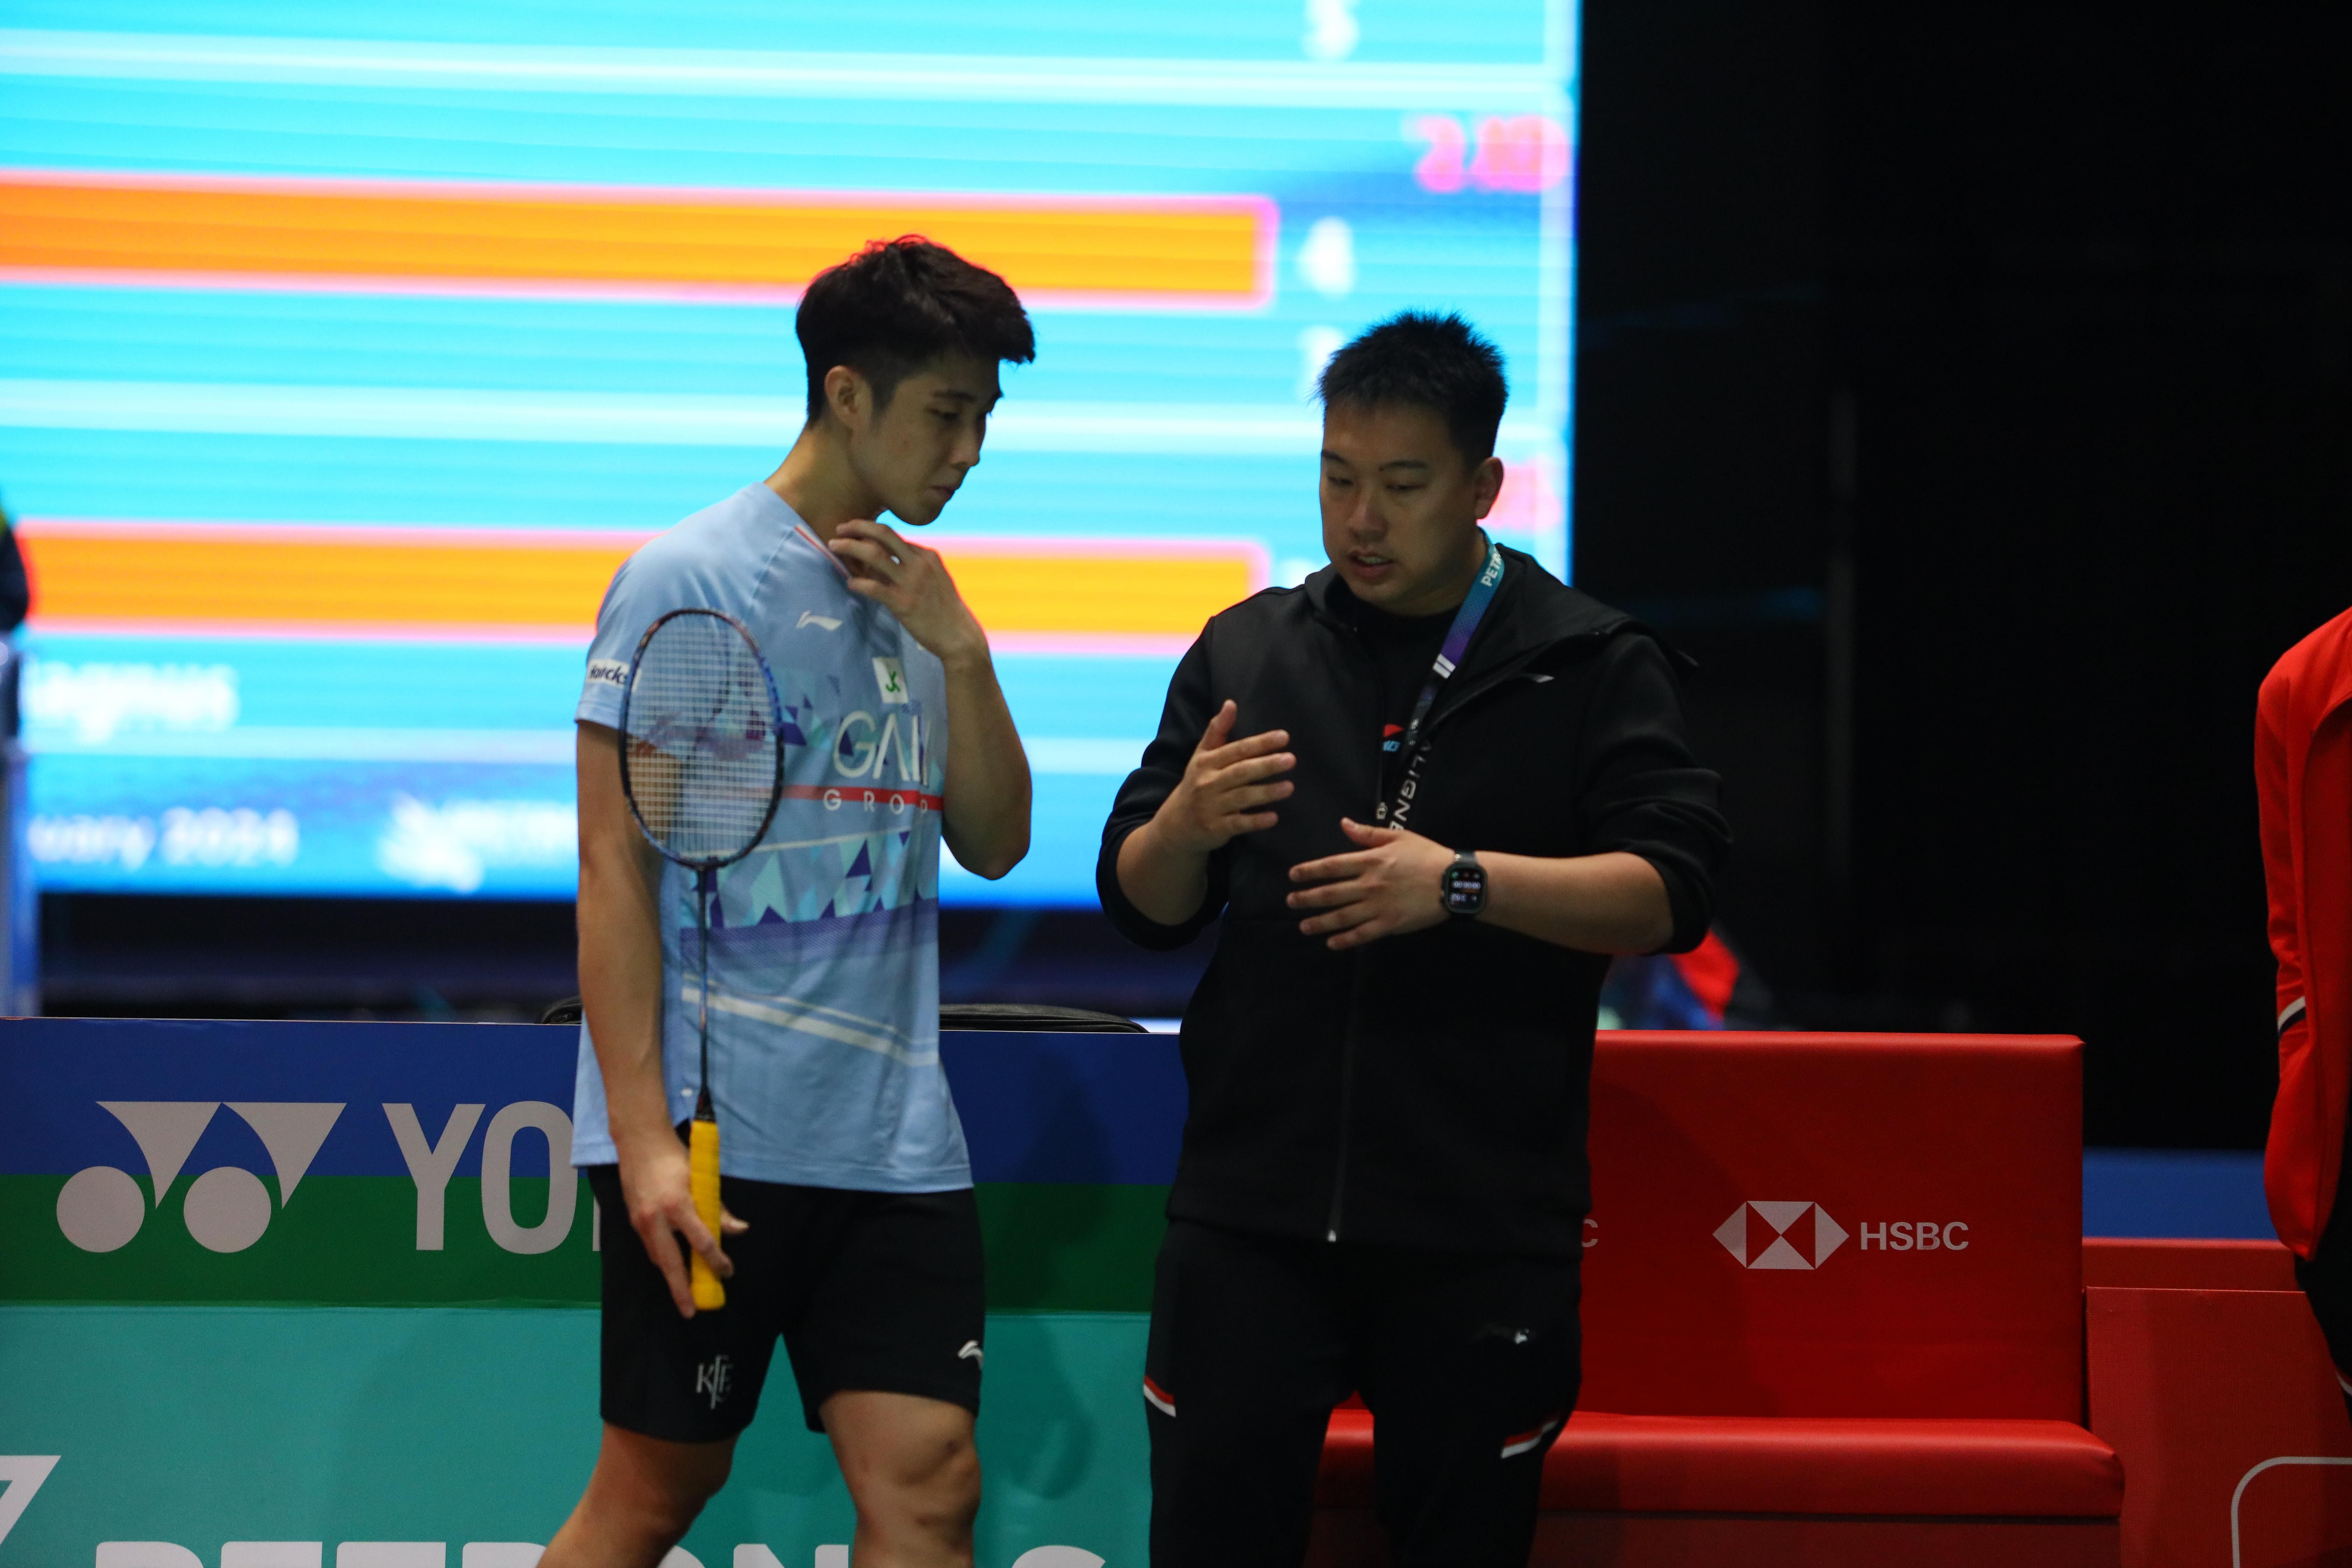 Lee Zii Jia knocks Loh Kean Yew out of All England Open